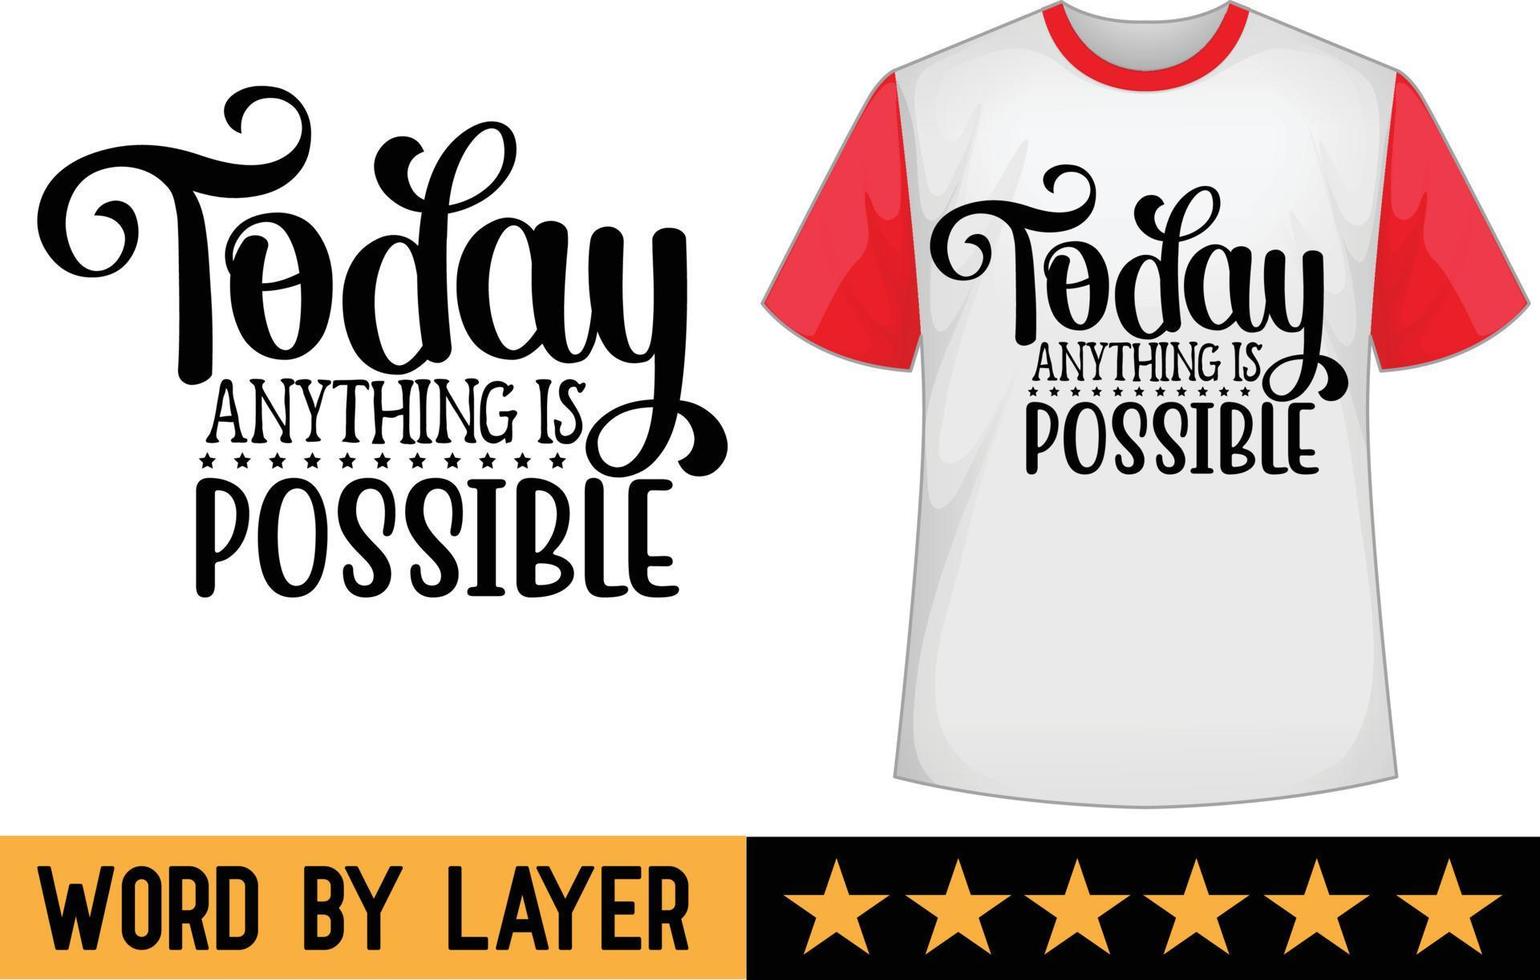 Today anything is possible svg t shirt design vector